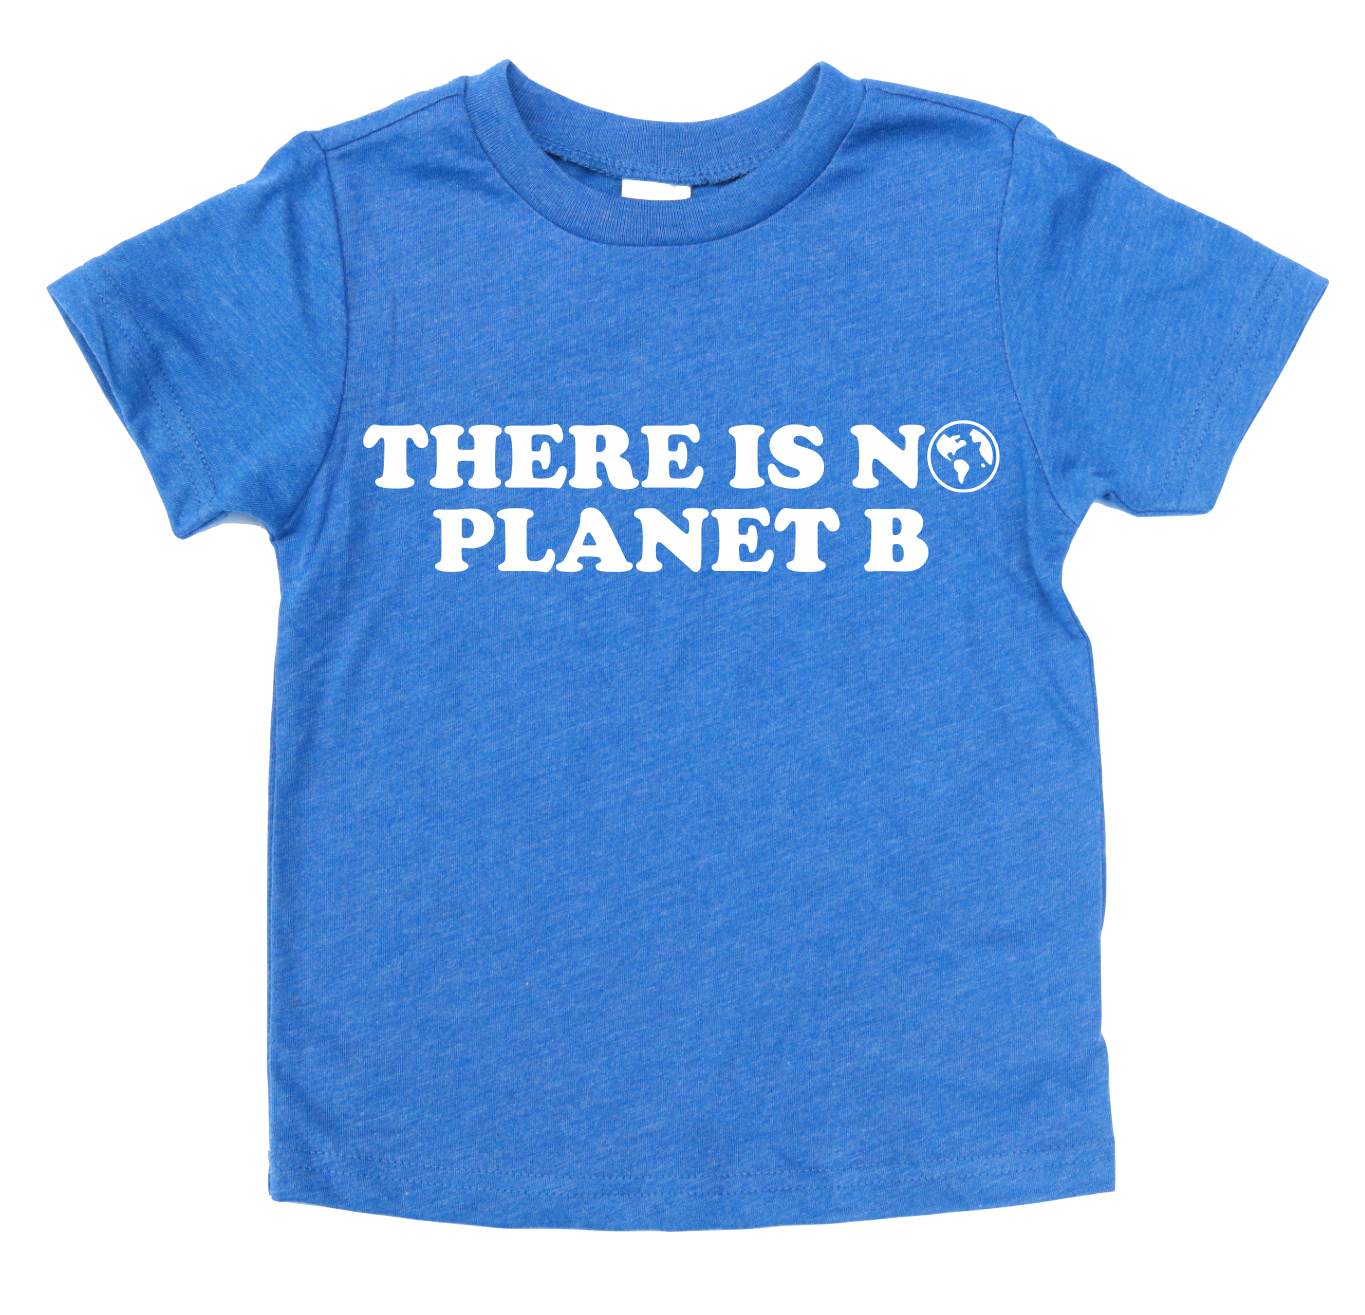 THERE IS NO PLANET B KIDS SHIRT